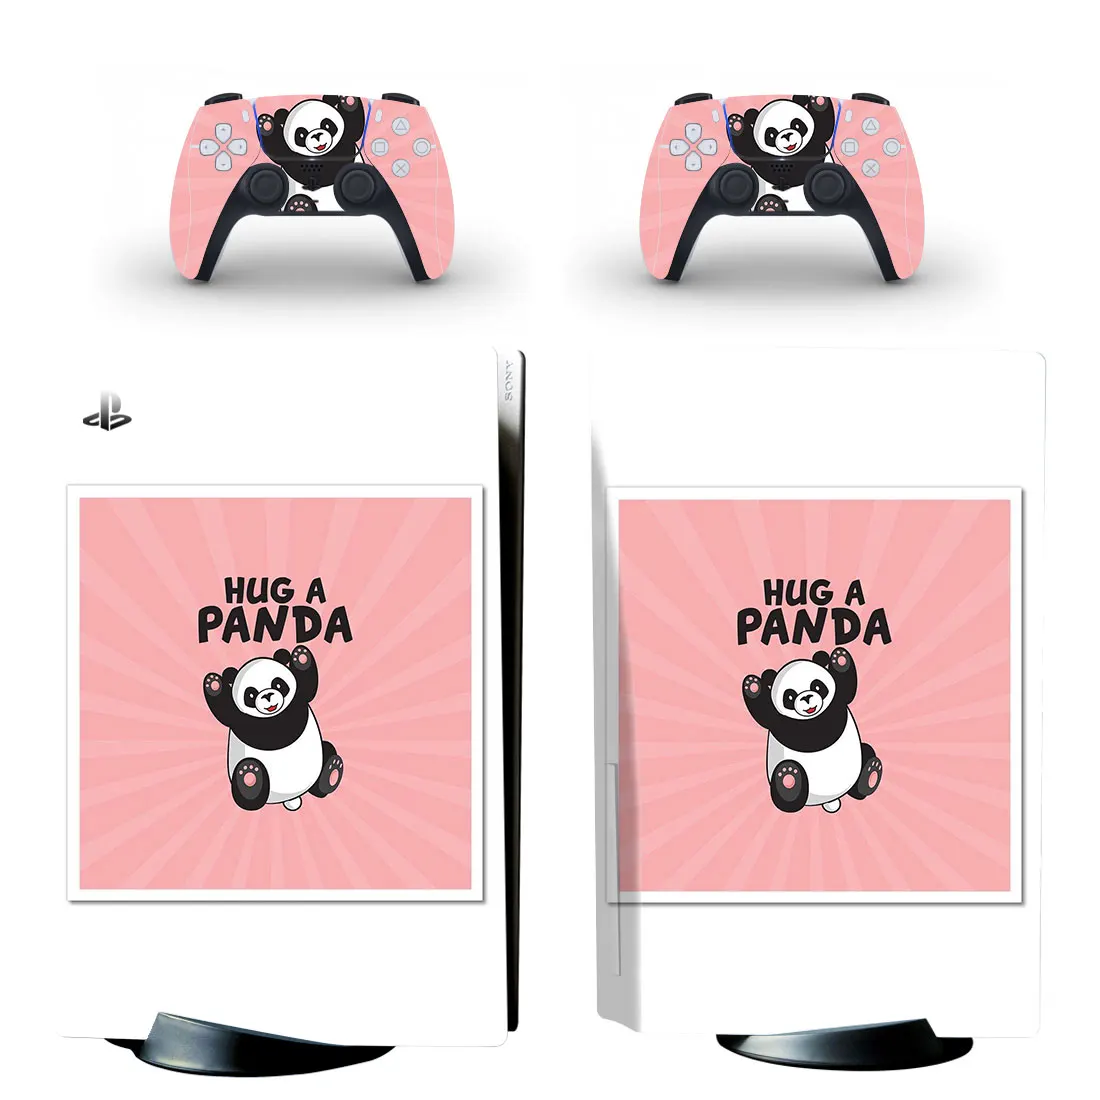 

Hug A Panda PS5 Disc Skin Sticker Cover for Playstation 5 Console & 2 Controllers Decal Vinyl Protective Disk Skins